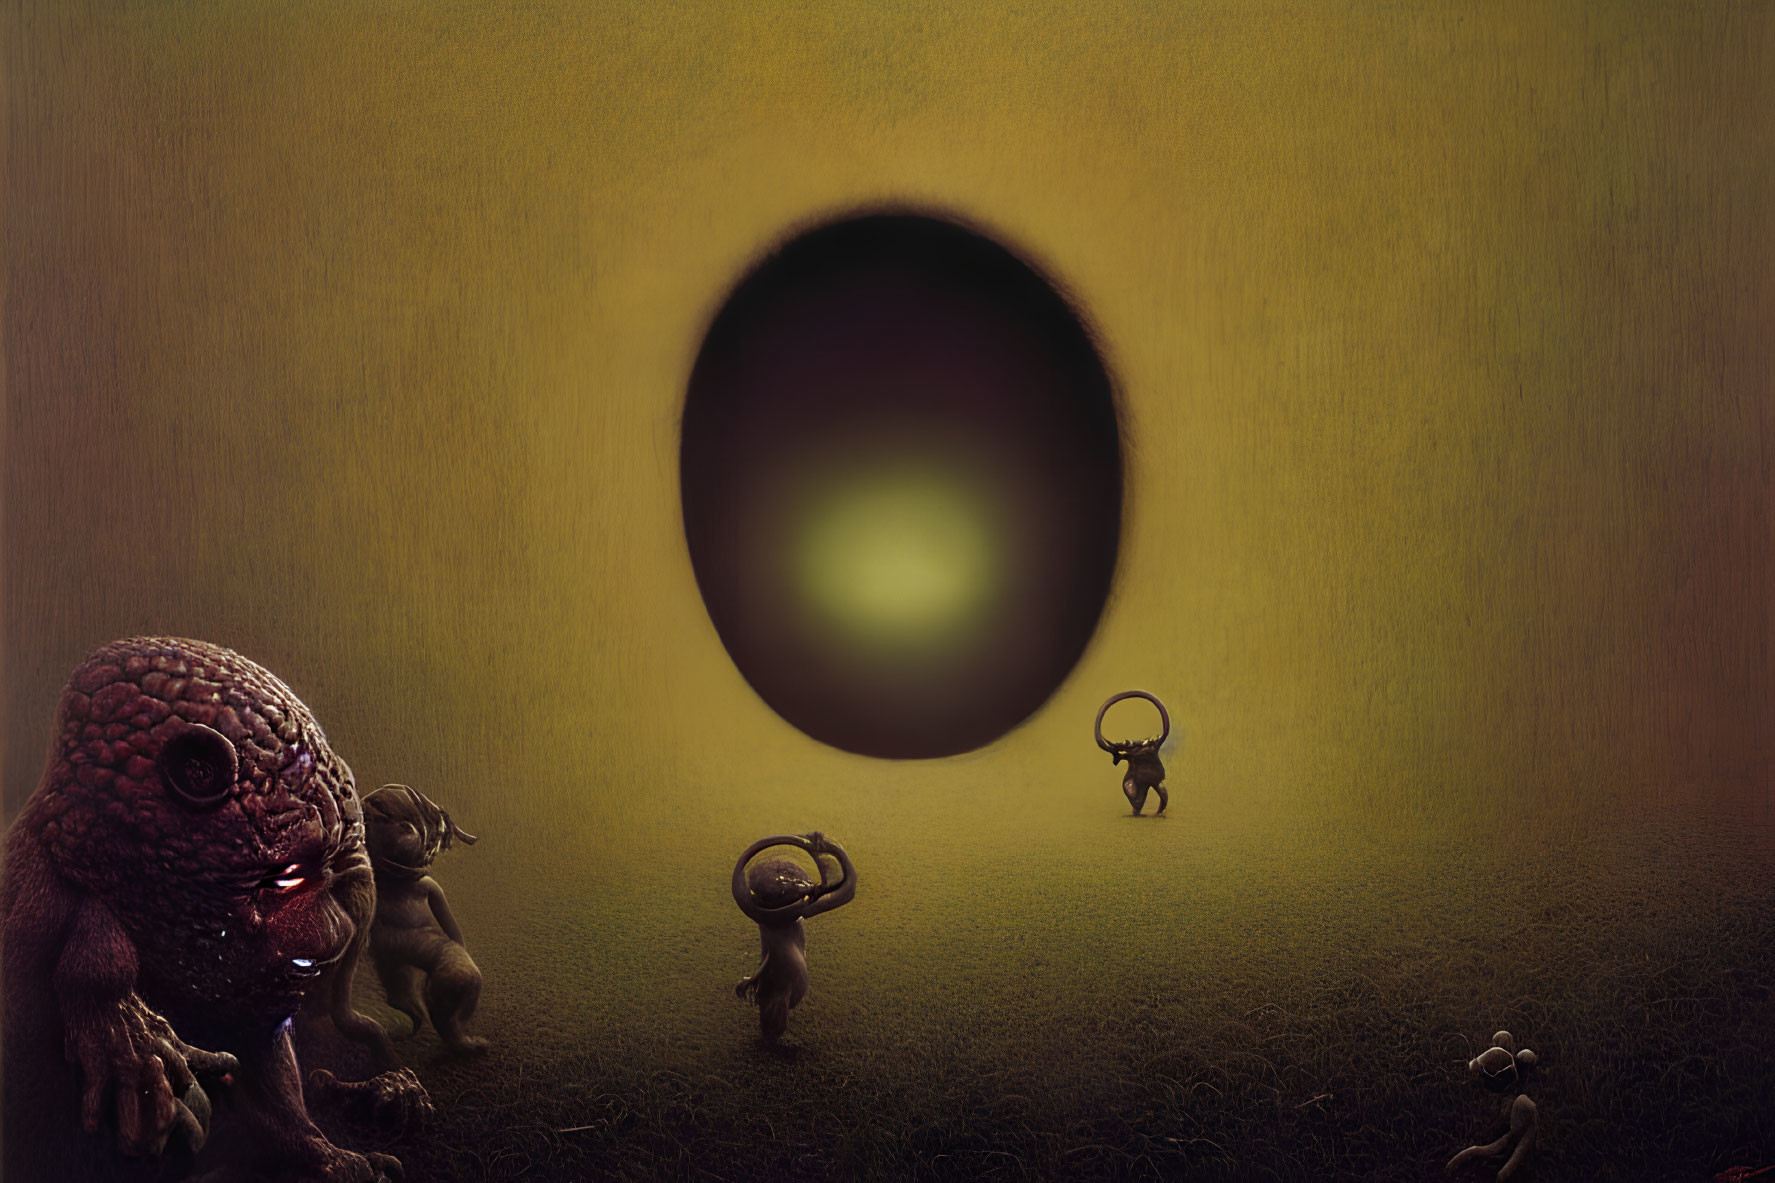 Surreal artwork of small creatures and rings near central black hole